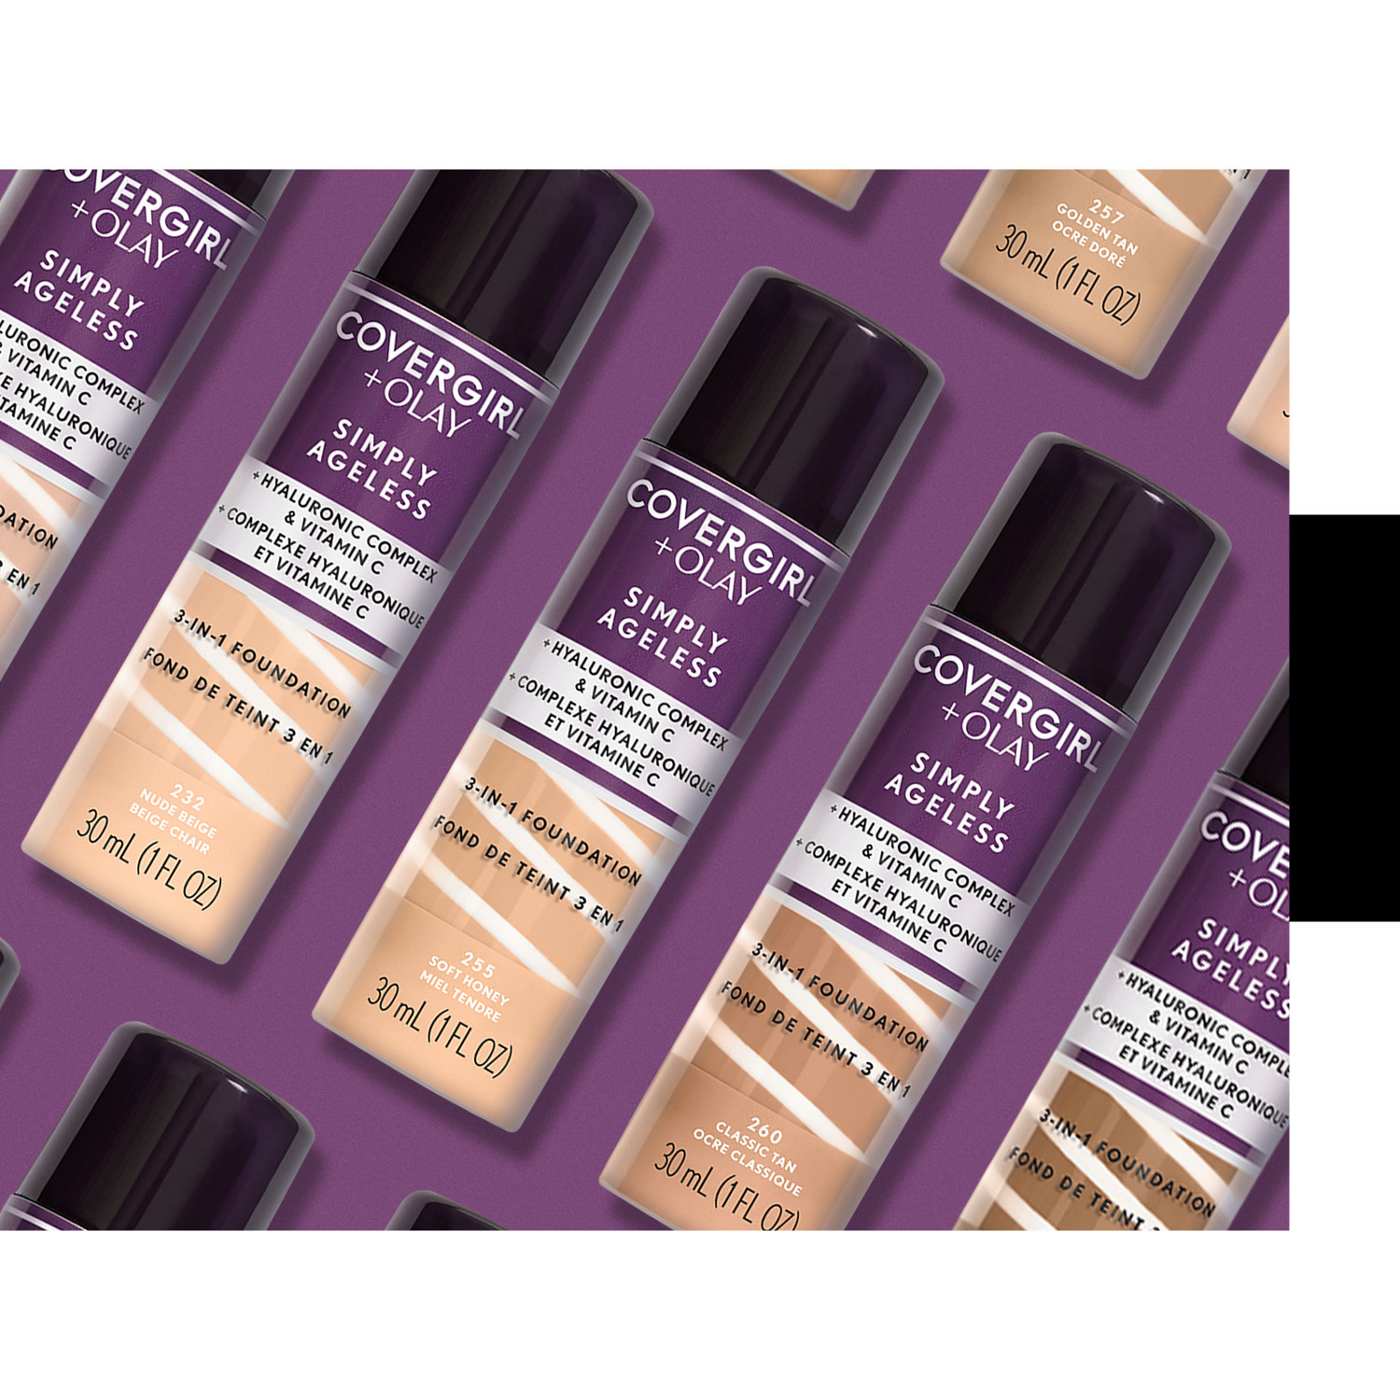 Covergirl Simply Ageless 3-in-1 Liquid Foundation 232 Nude Beige; image 3 of 5